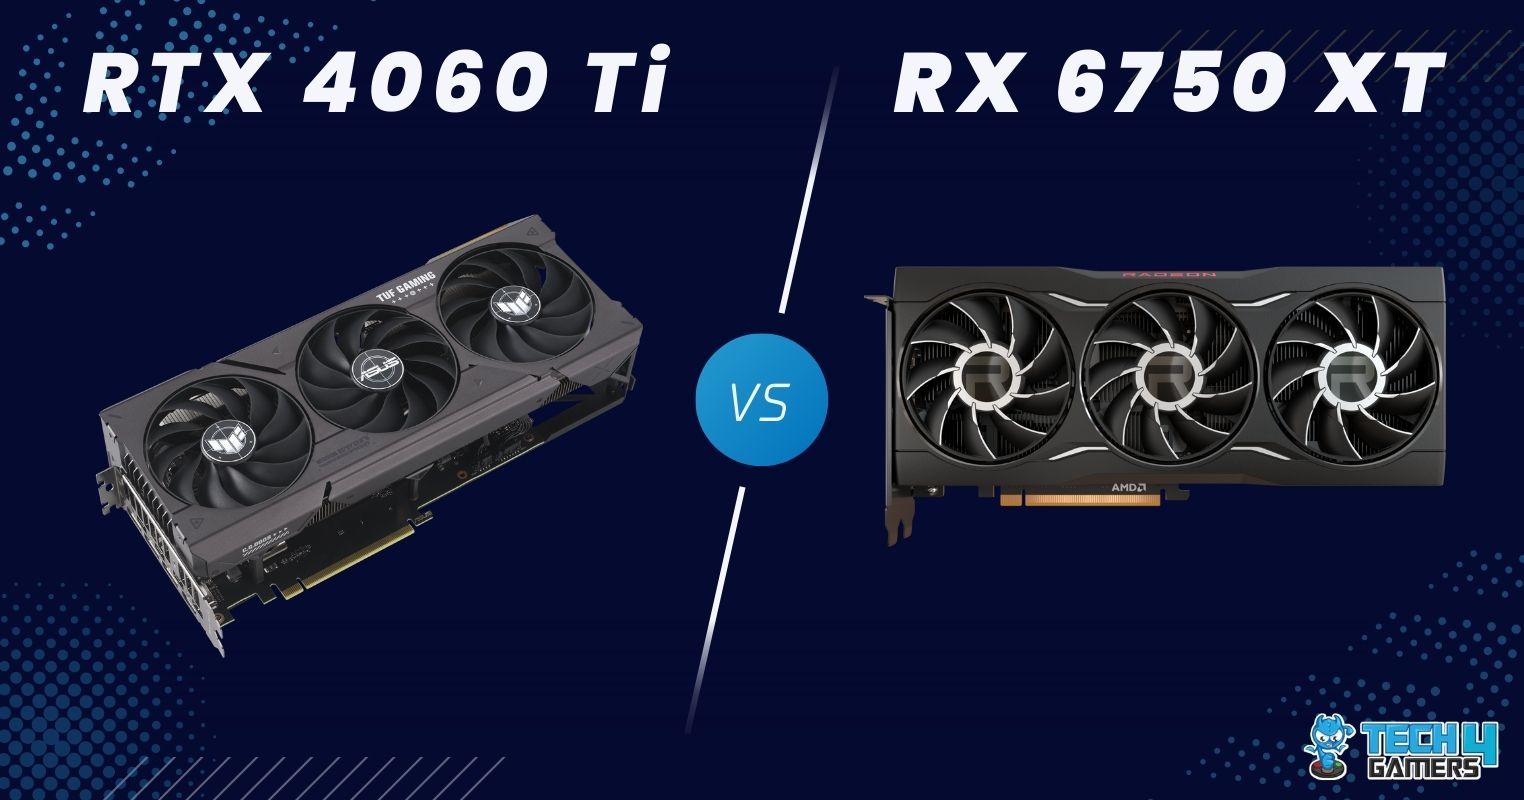 RTX 4060 Ti vs RTX 4060 vs RX 7600 - what's the best choice?